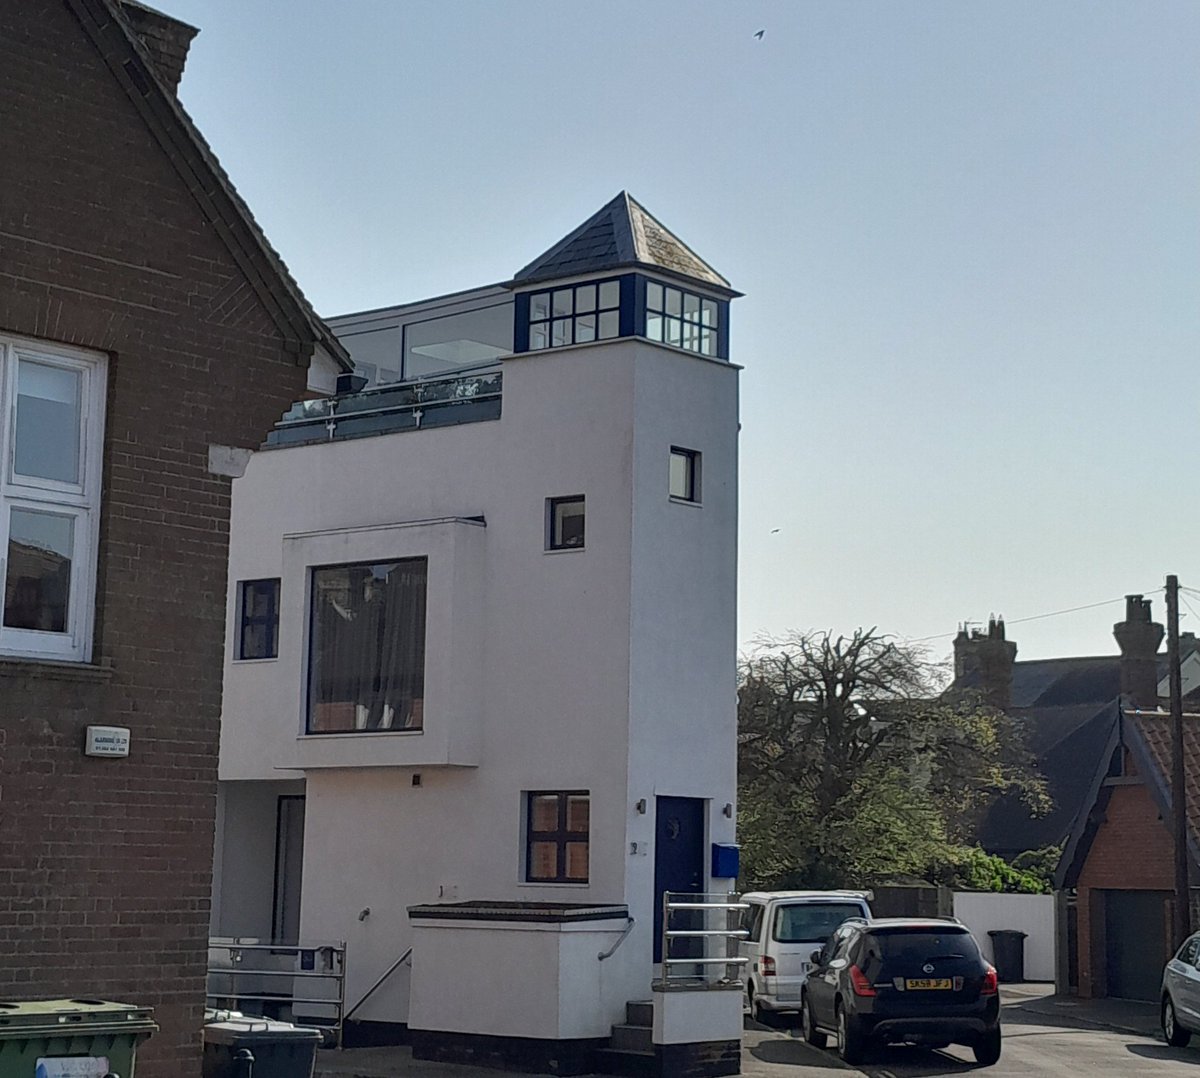 Not entirely sure whether this slightly emaciated house is a tribute to The Bauhaus or the Vienna Secession - but it's most certainly in Southwold.